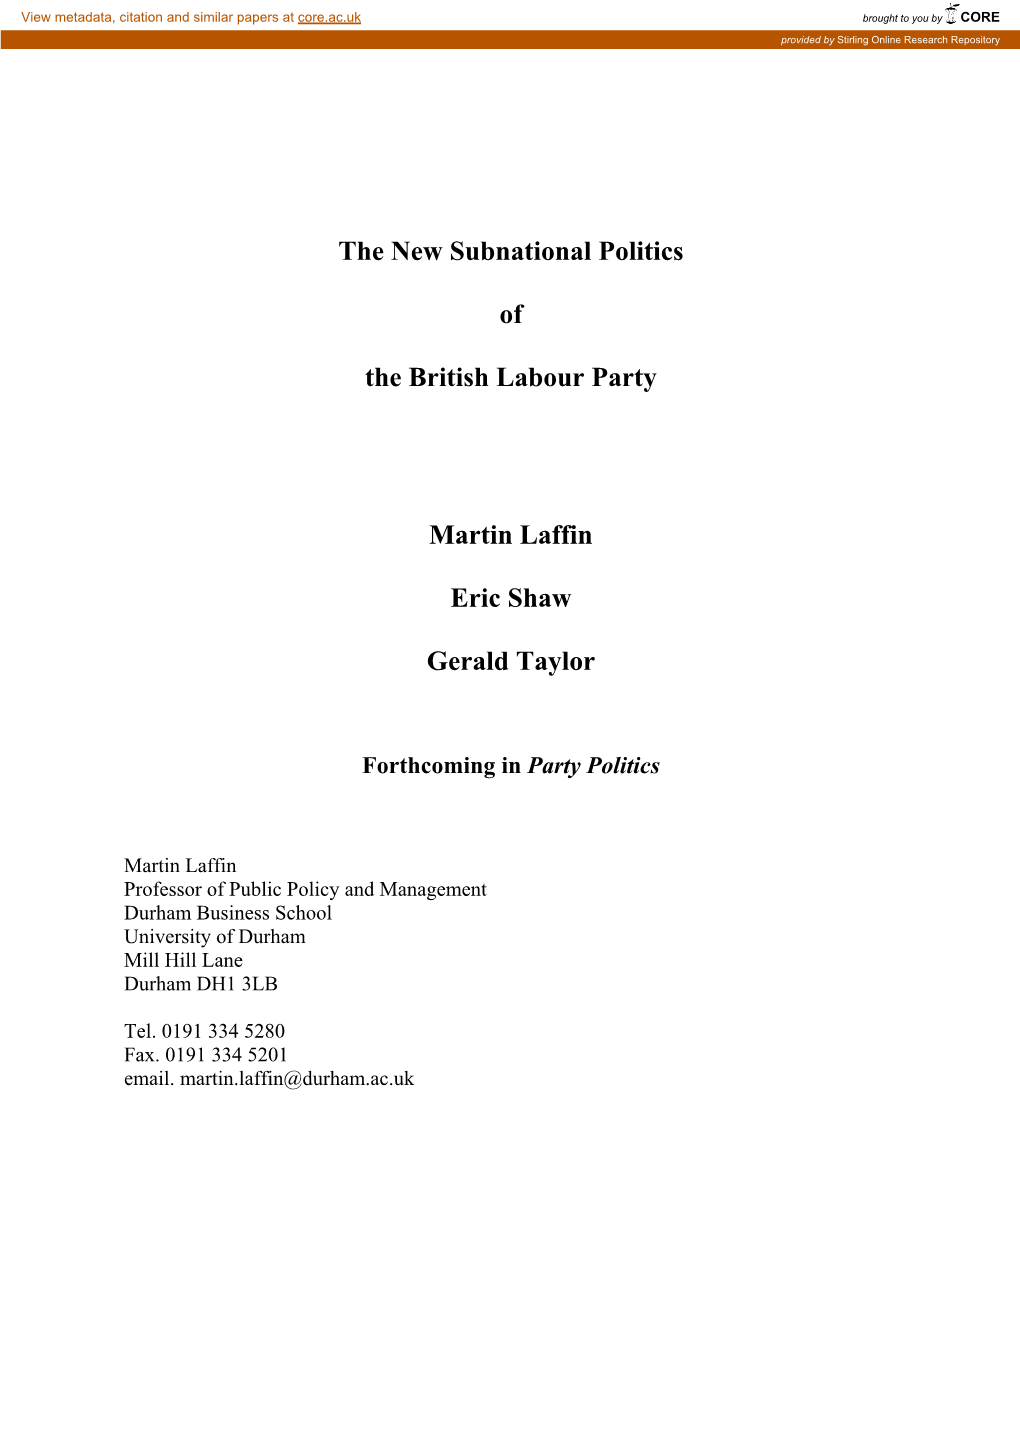 The New Subnational Politics of the British Labour Party